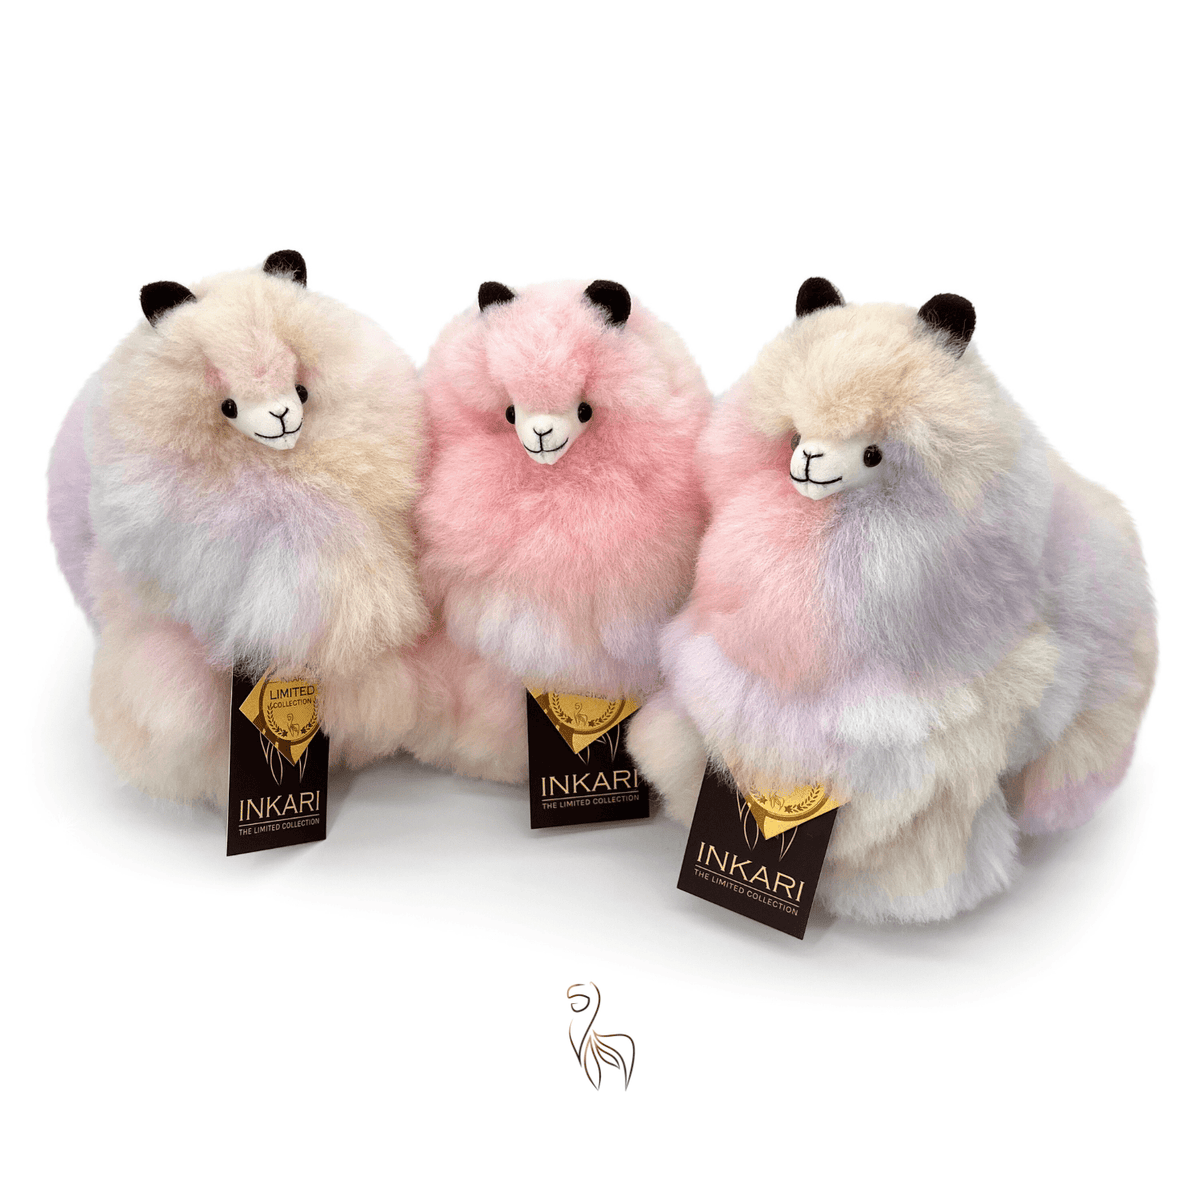 Pastel - Small Alpaca Toy (23cm) - Limited Edition